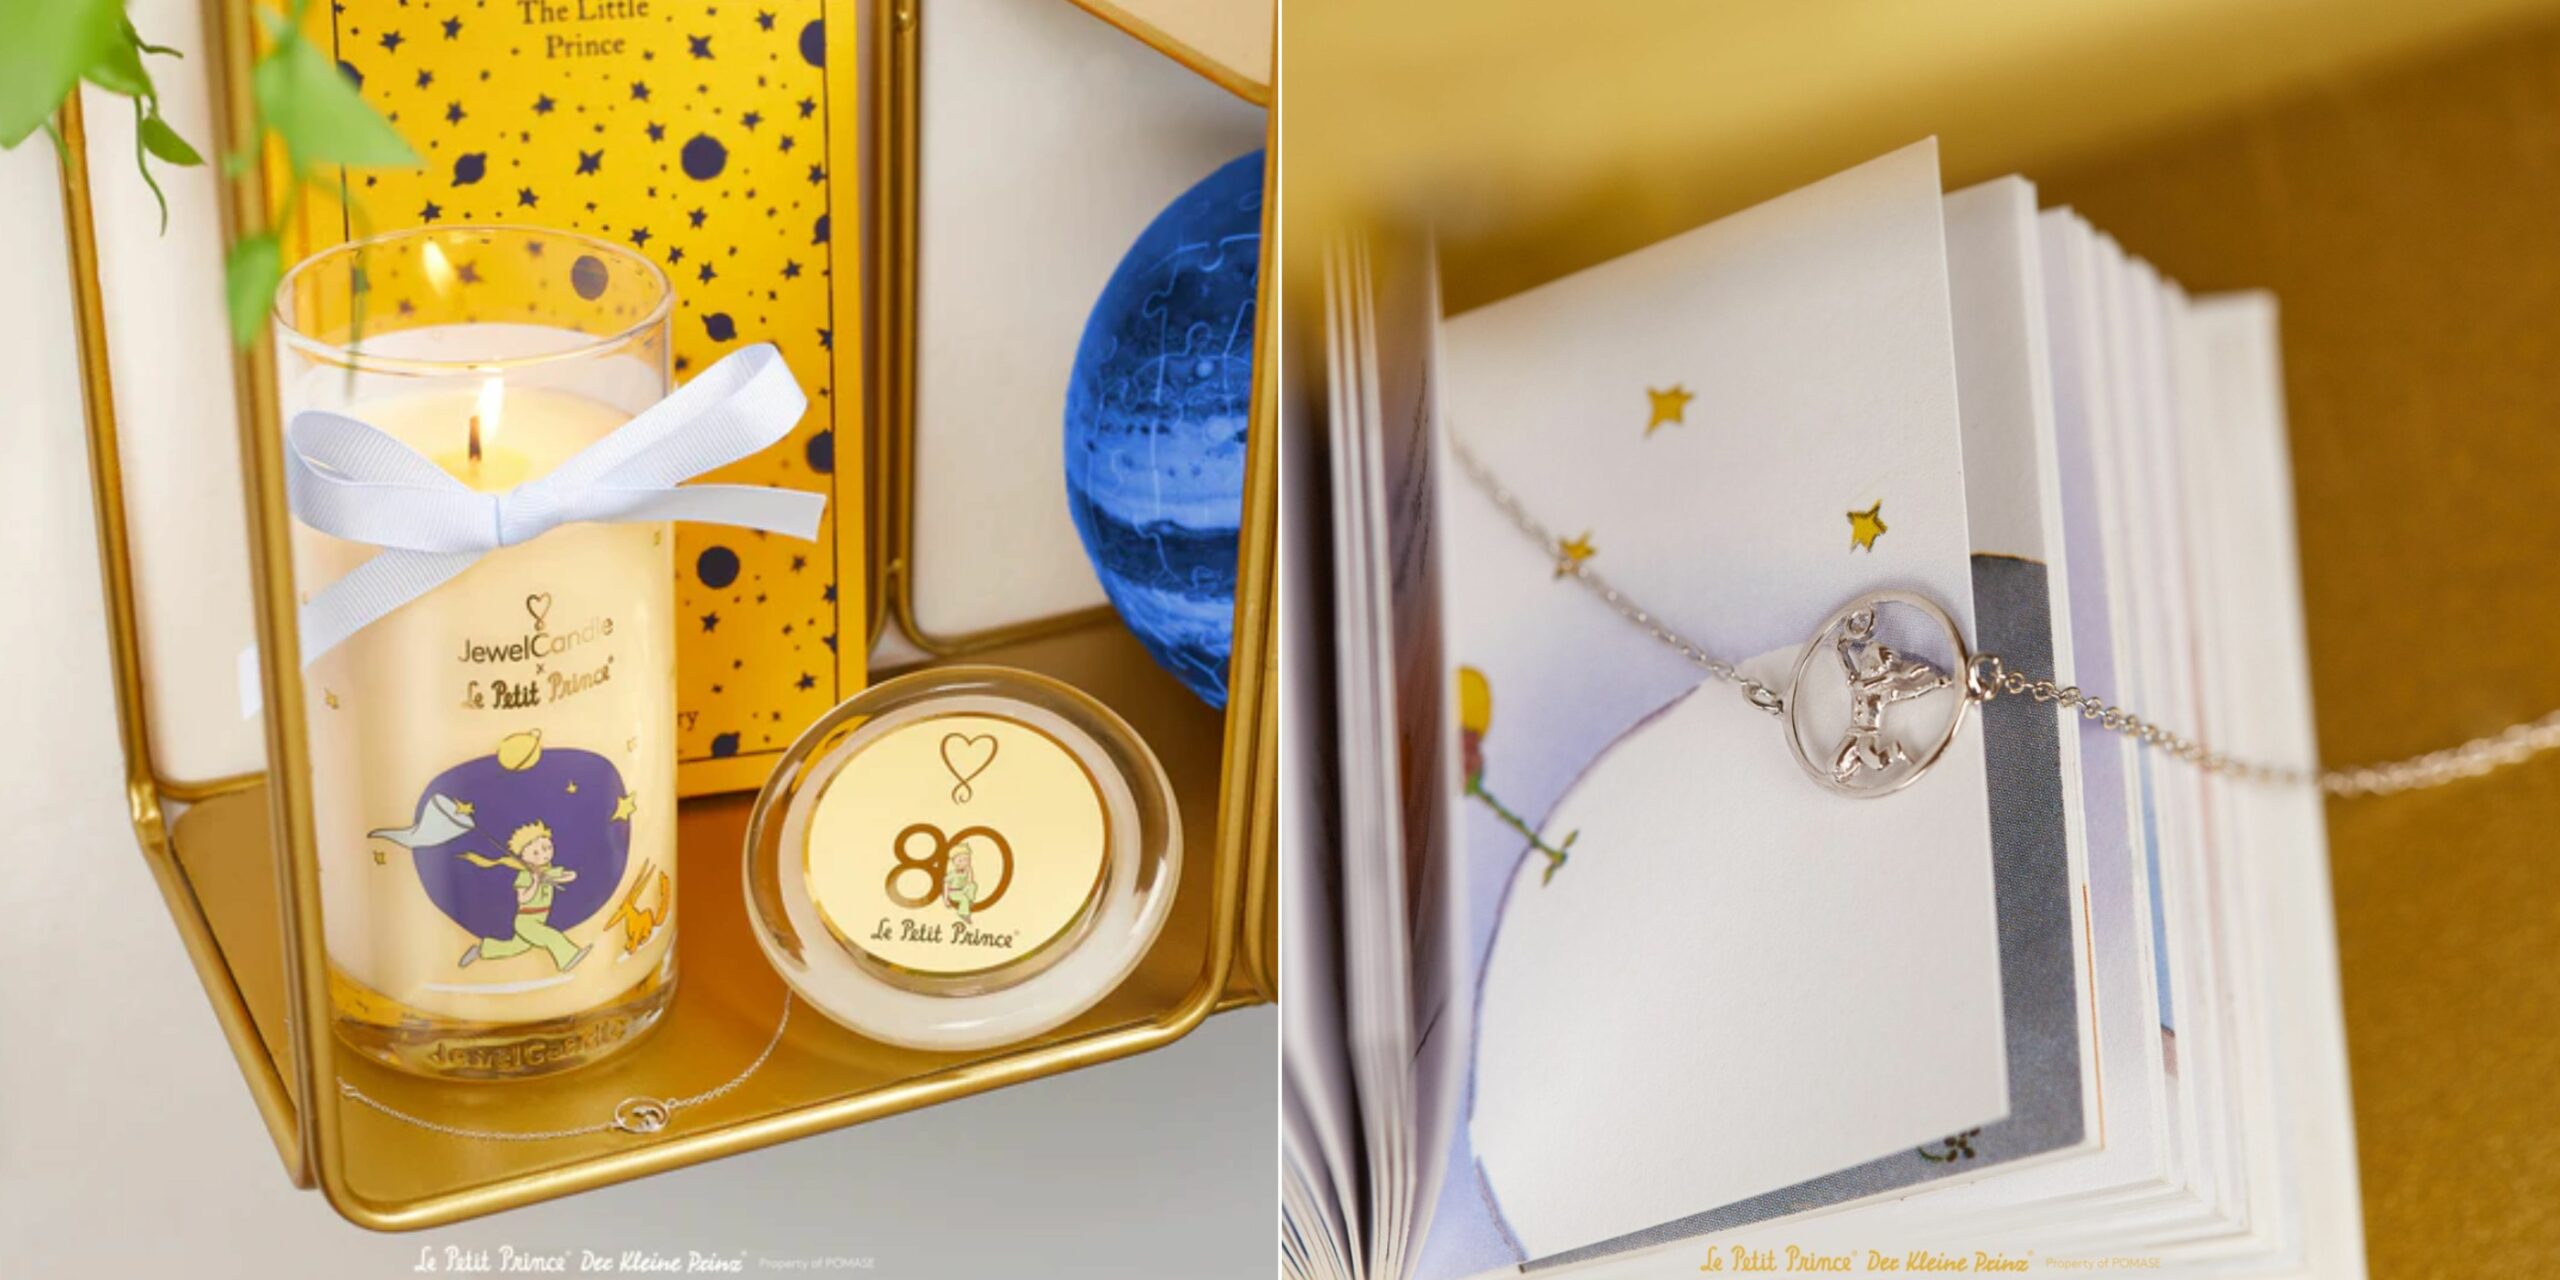 JewelCandle unveils a new Little Prince candle - Le Petit Prince